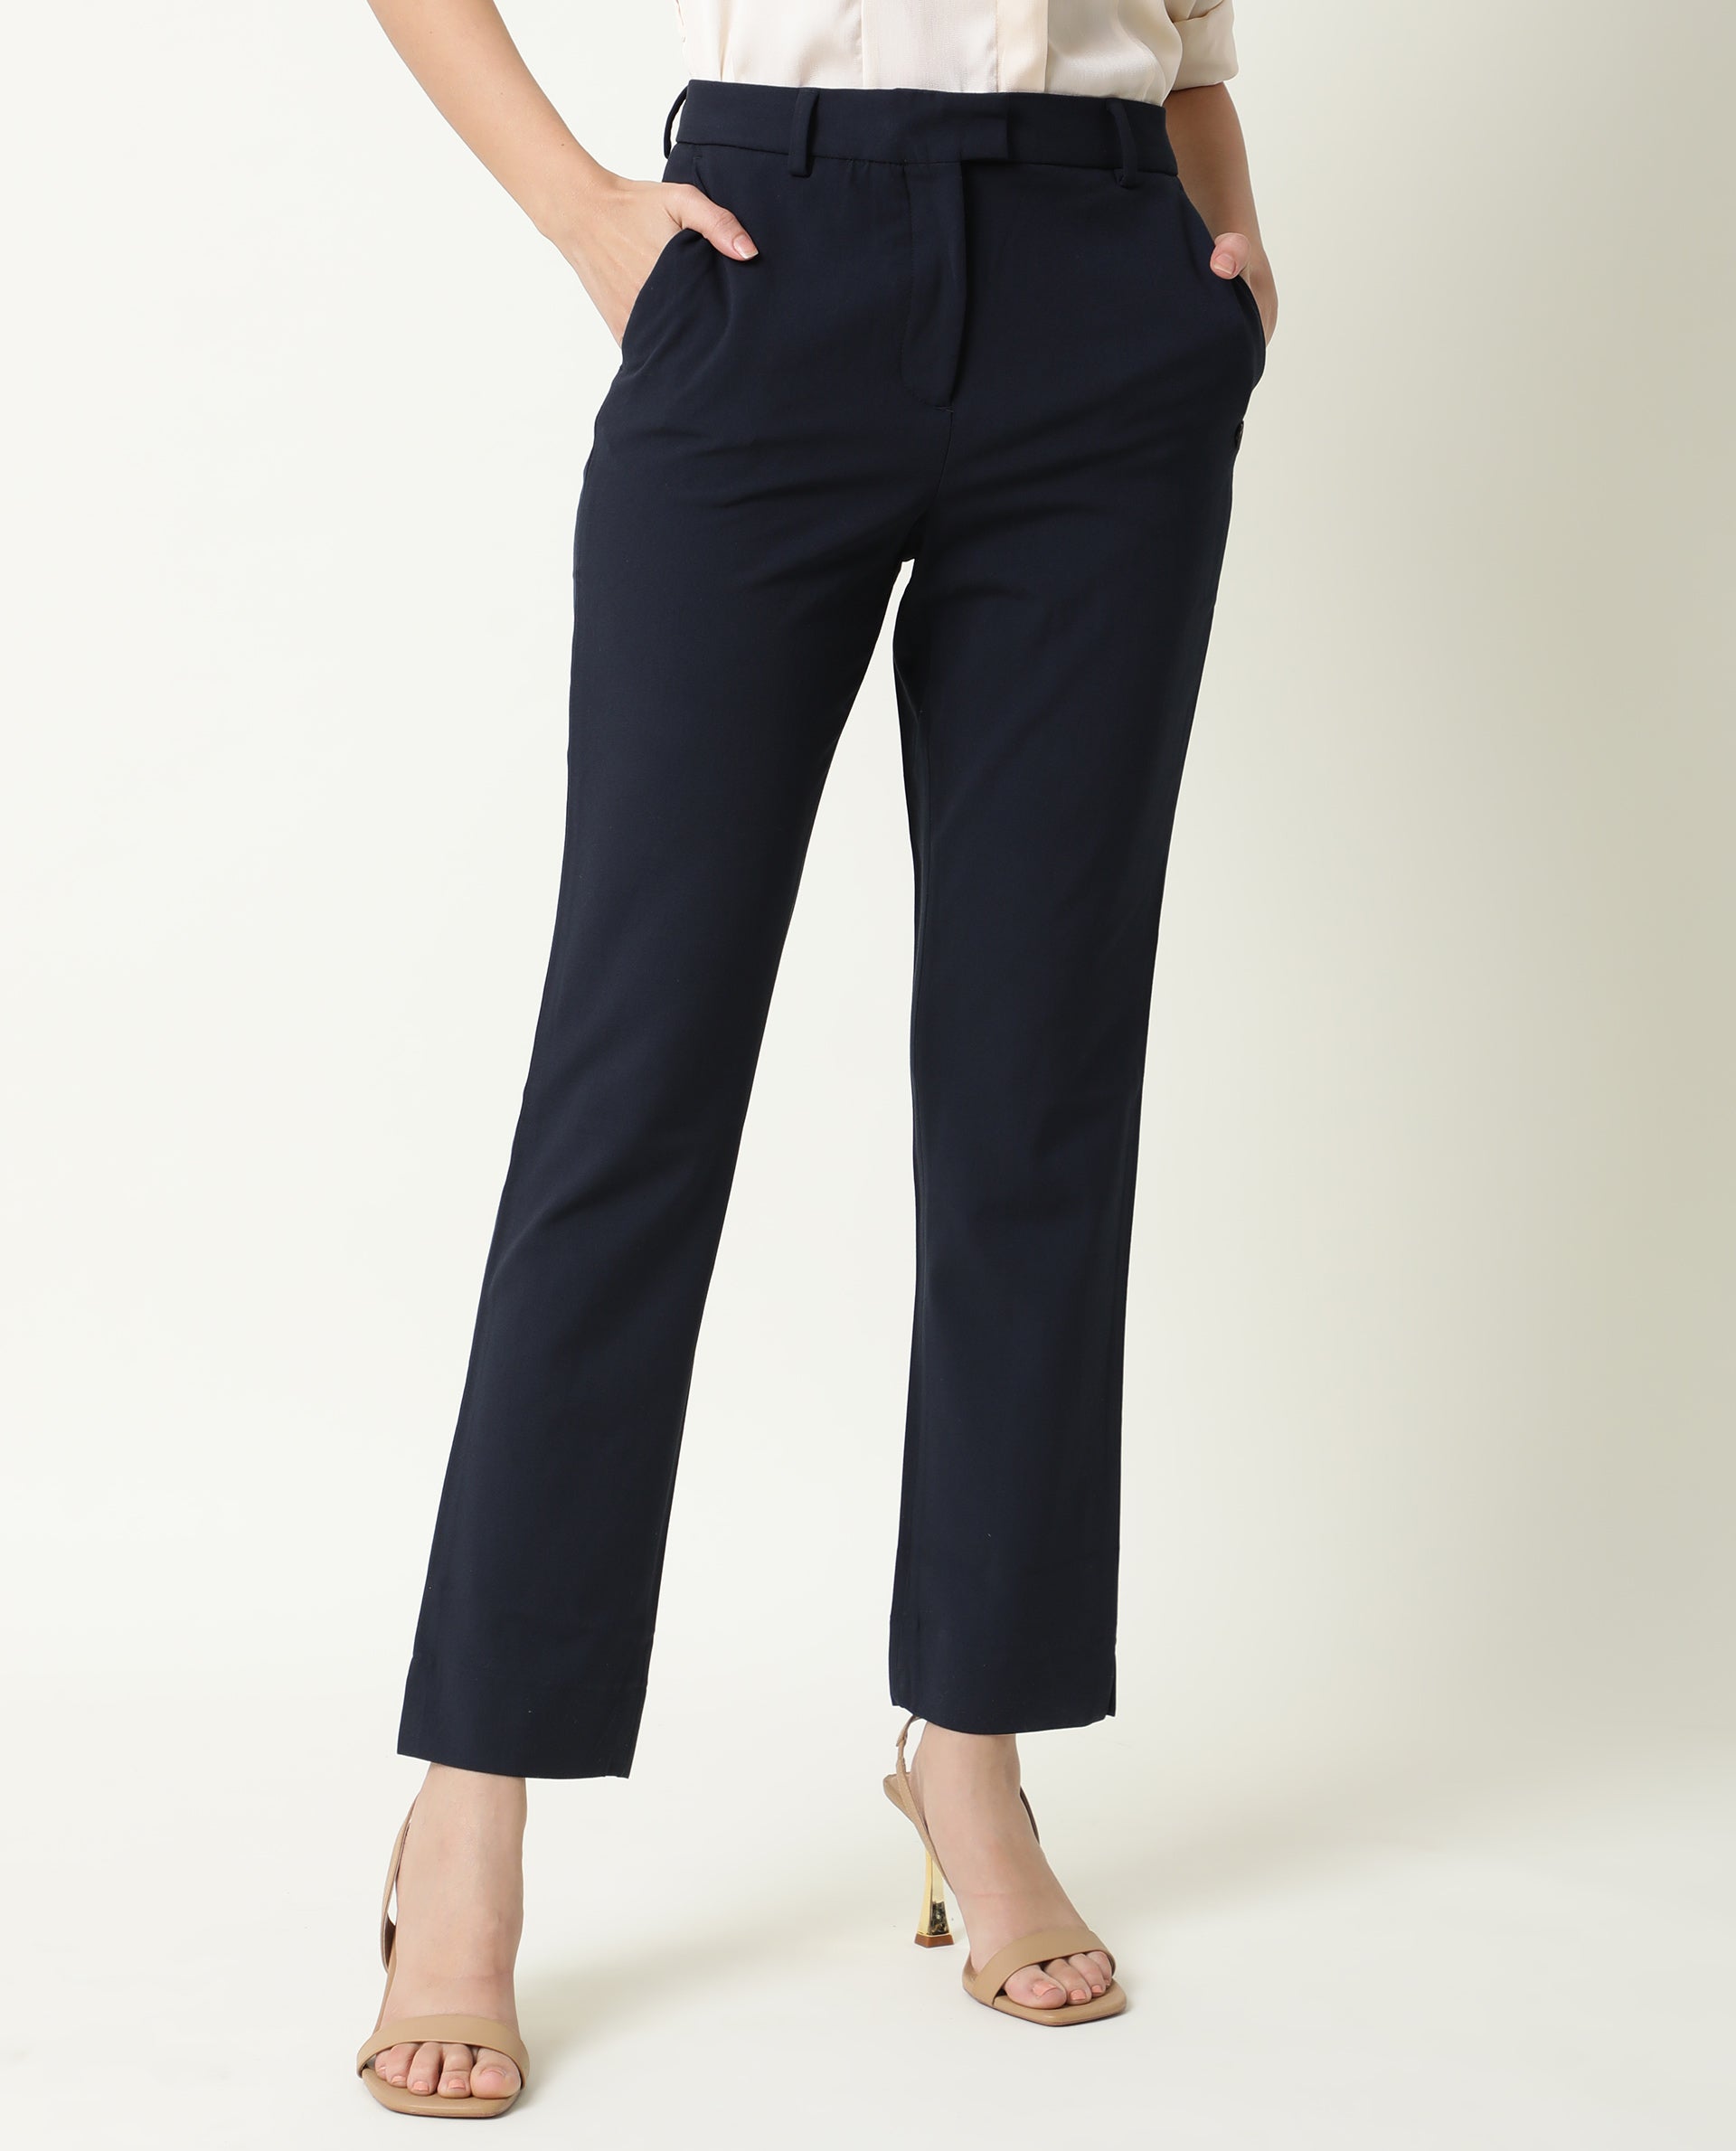 WOMENS YARD NAVY TROUSER Polycotton Lycra FABRIC Fitted FIT Button CLOSURE High Rise WAIST RISE Ankle Length